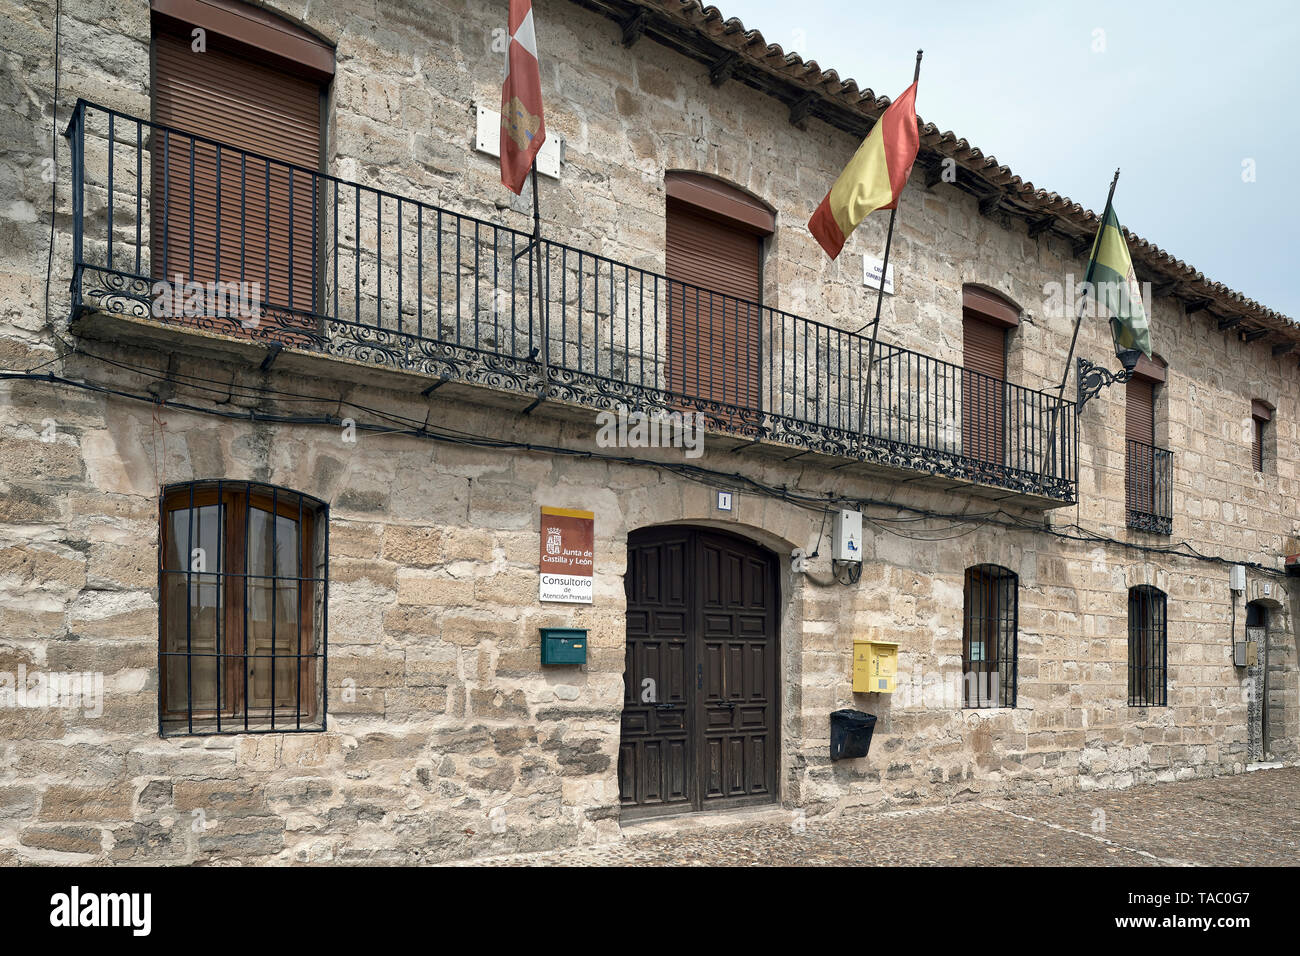 Town hall of Wamba, locality and Spanish municipality located in the region of Montes Torozos, in the province of Valladolid, Castilla y Leon, Spain Stock Photo